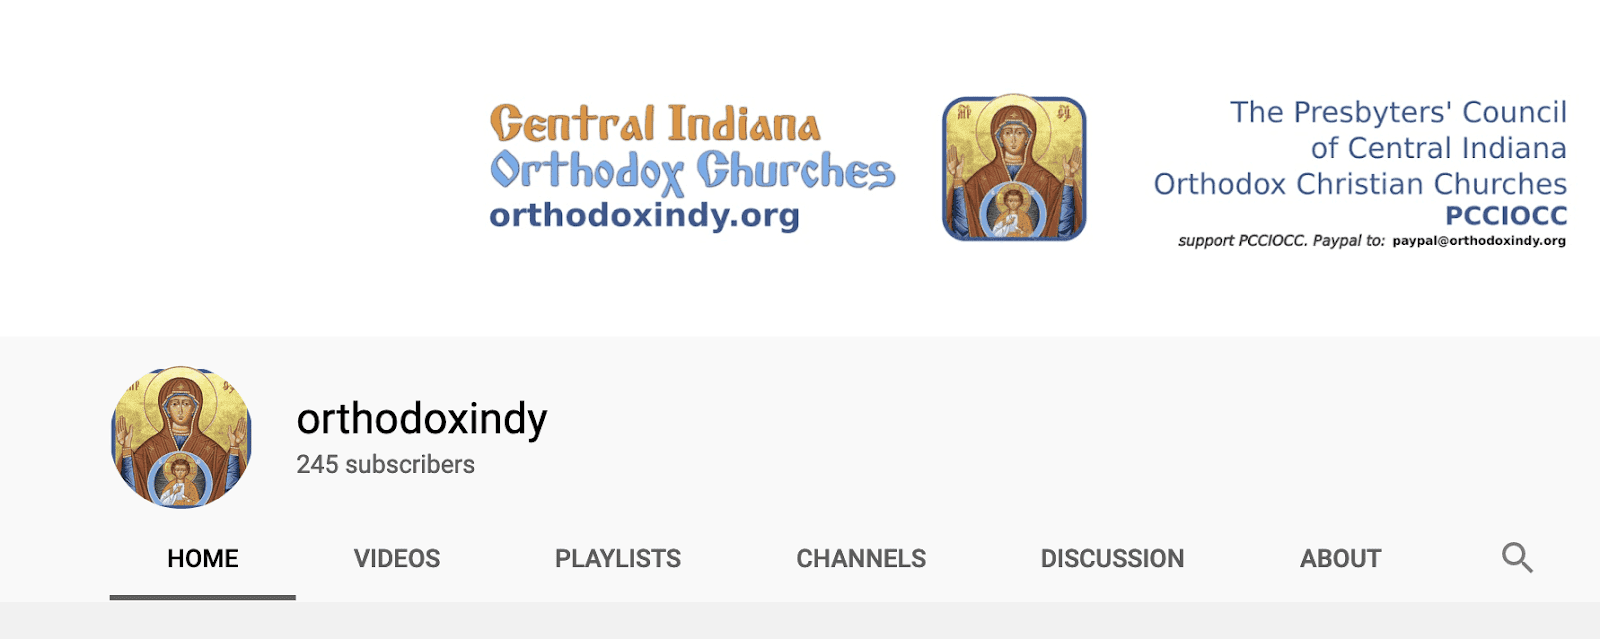 https://www.youtube.com/user/orthodoxindy